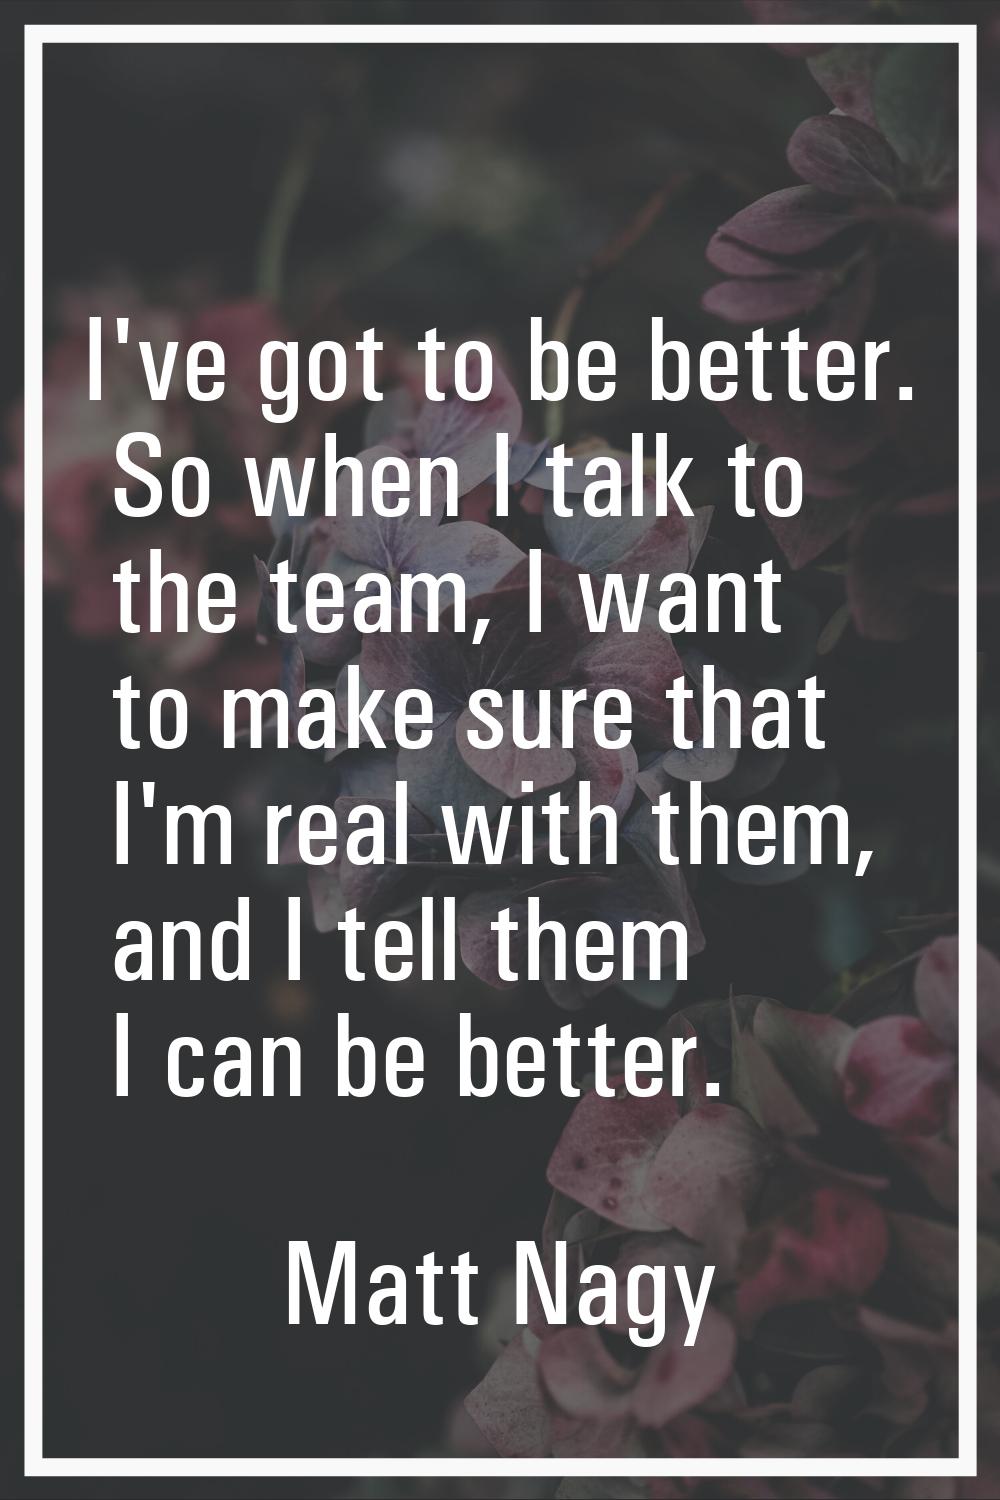 I've got to be better. So when I talk to the team, I want to make sure that I'm real with them, and